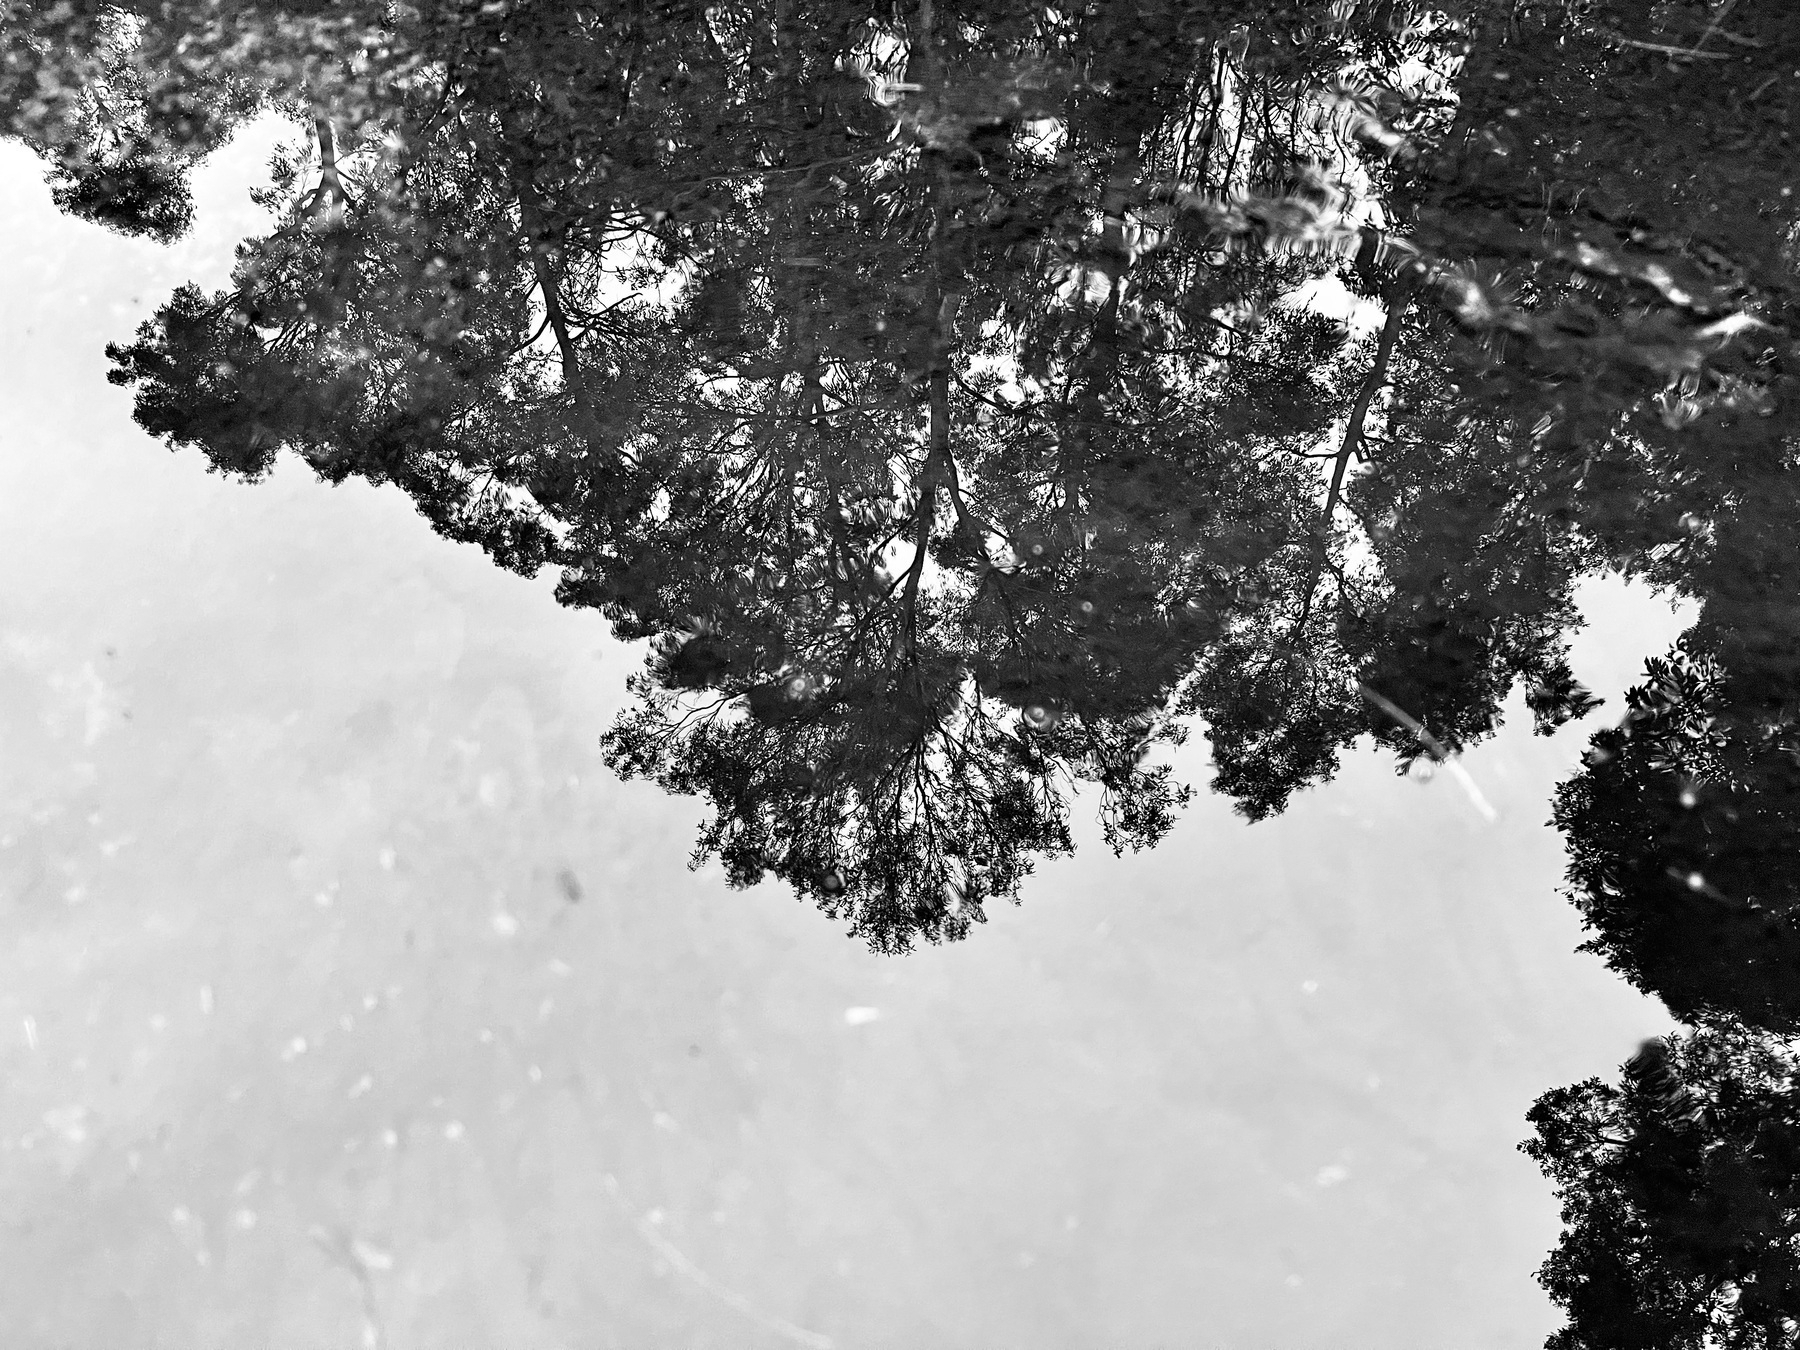 Upside-down gum trees in a puddle of water